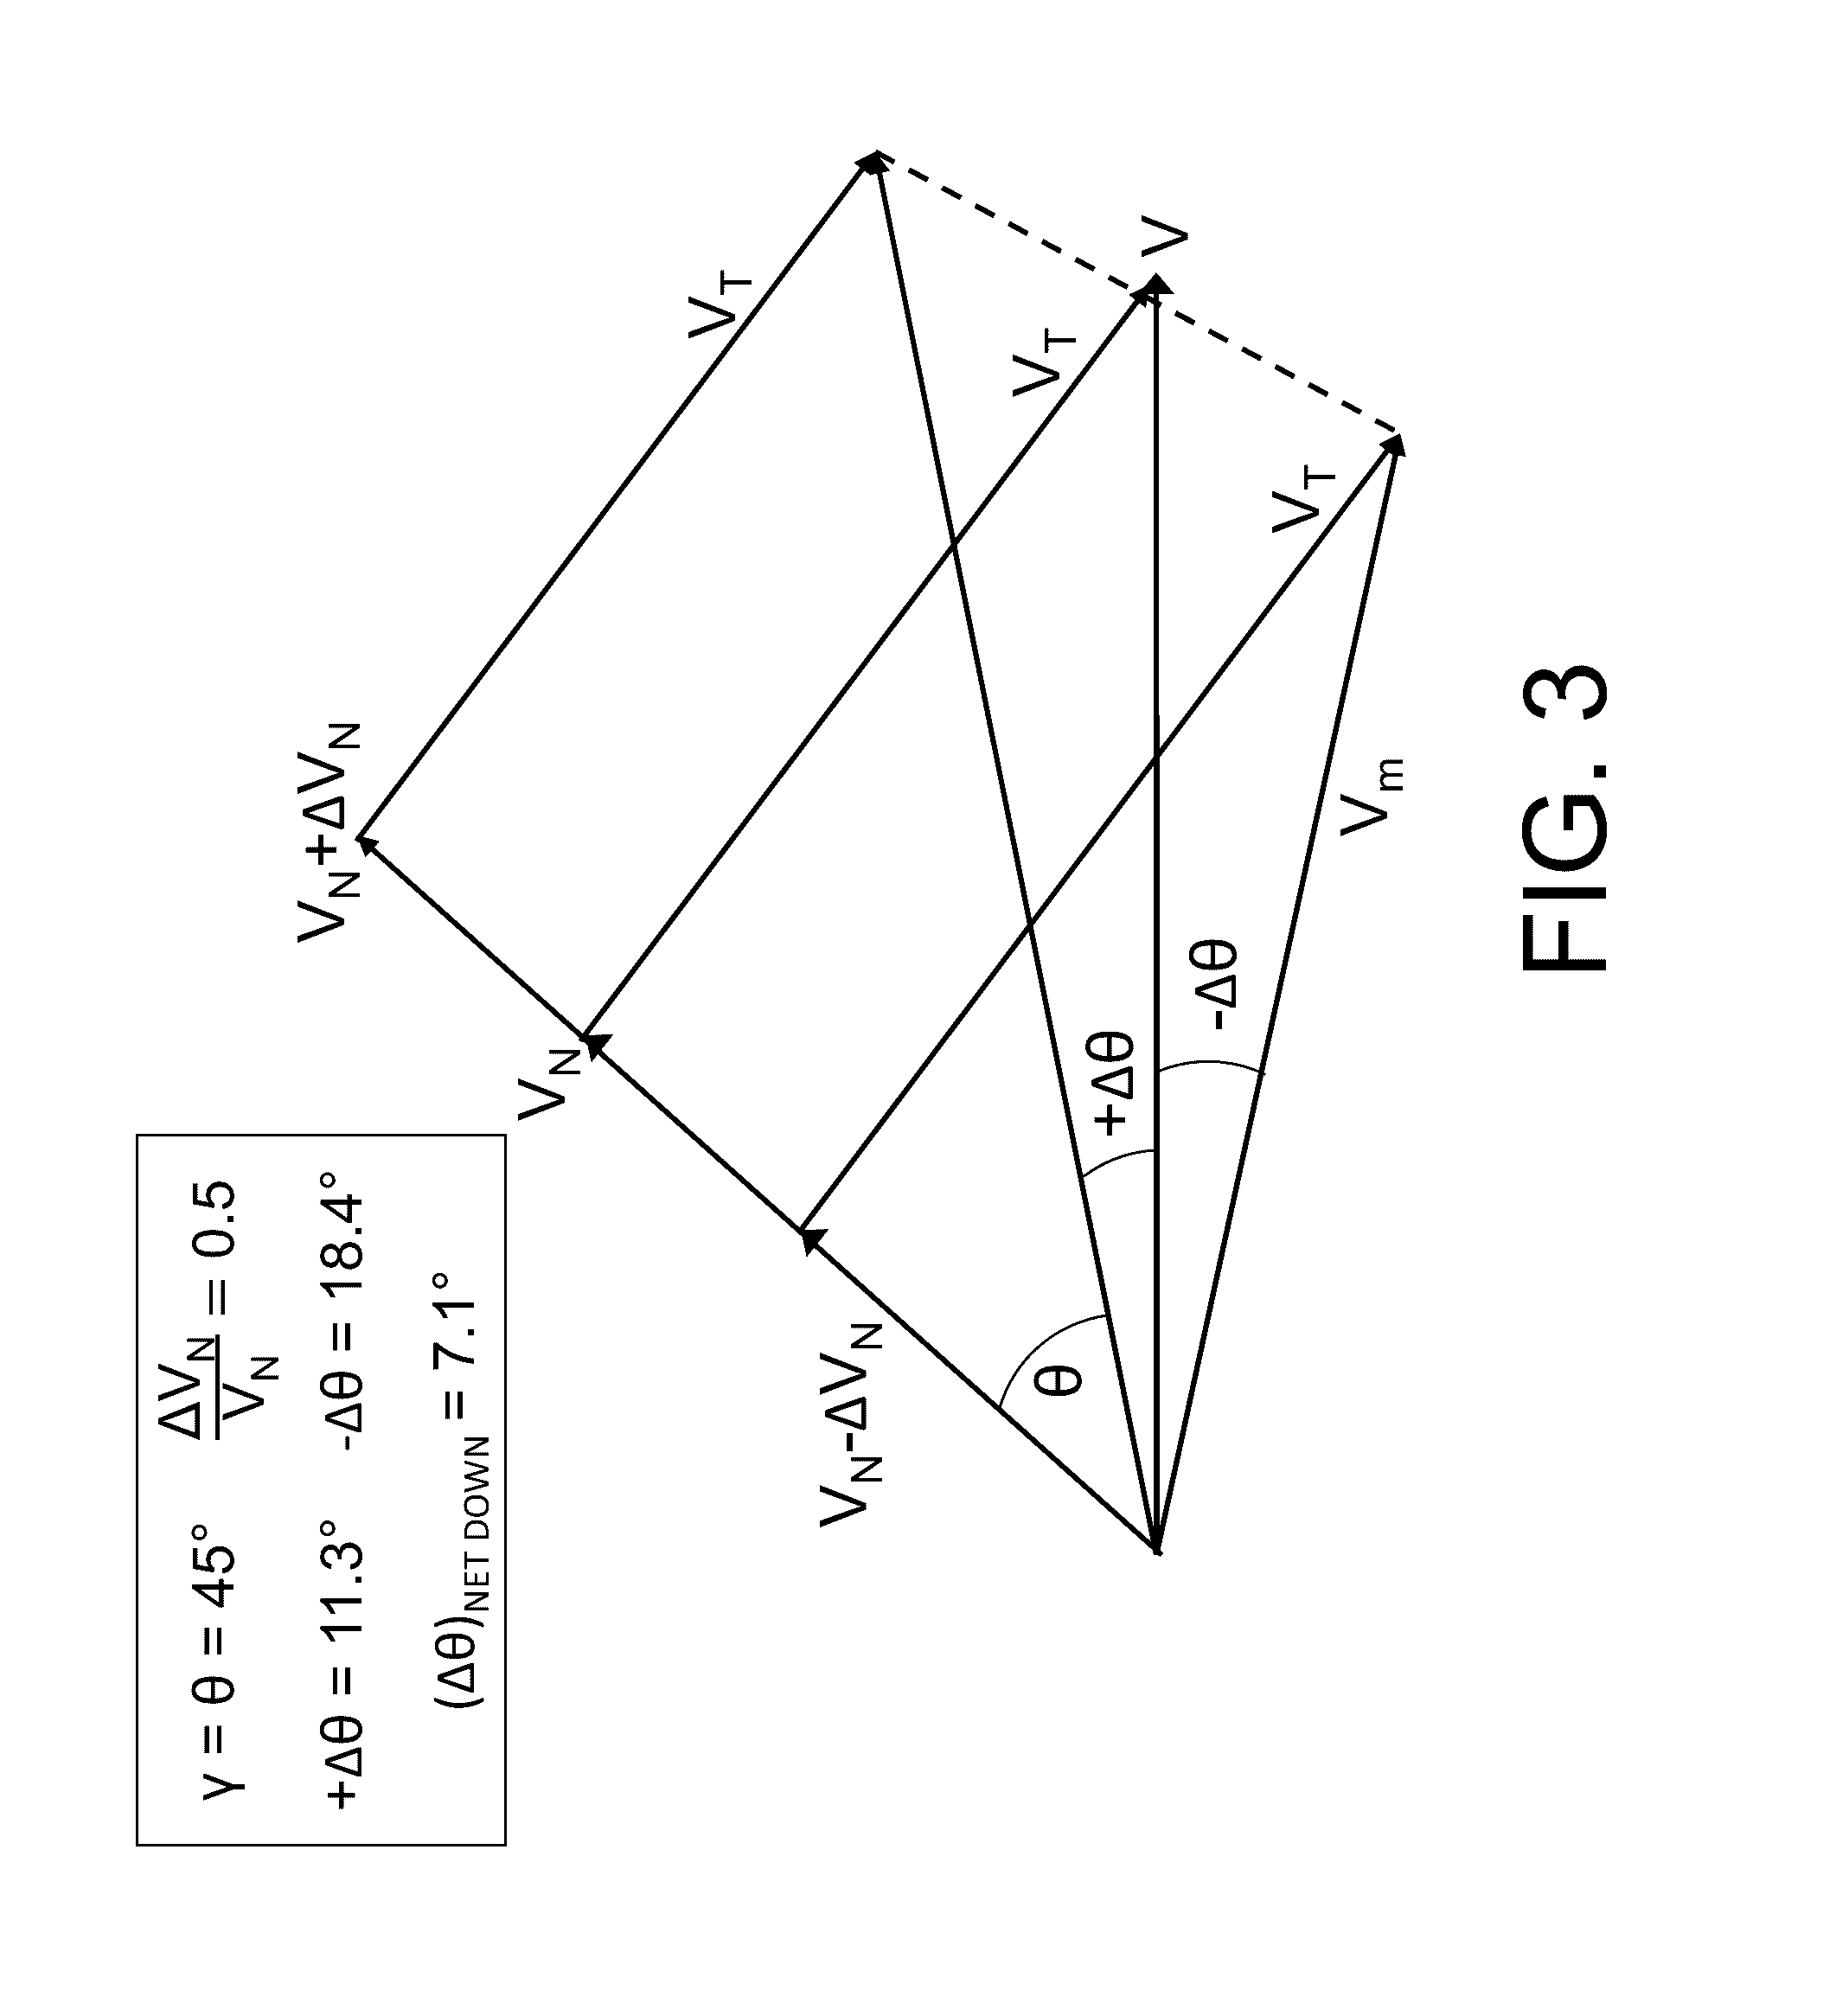 Acoustophoretic device for angled wave particle deflection